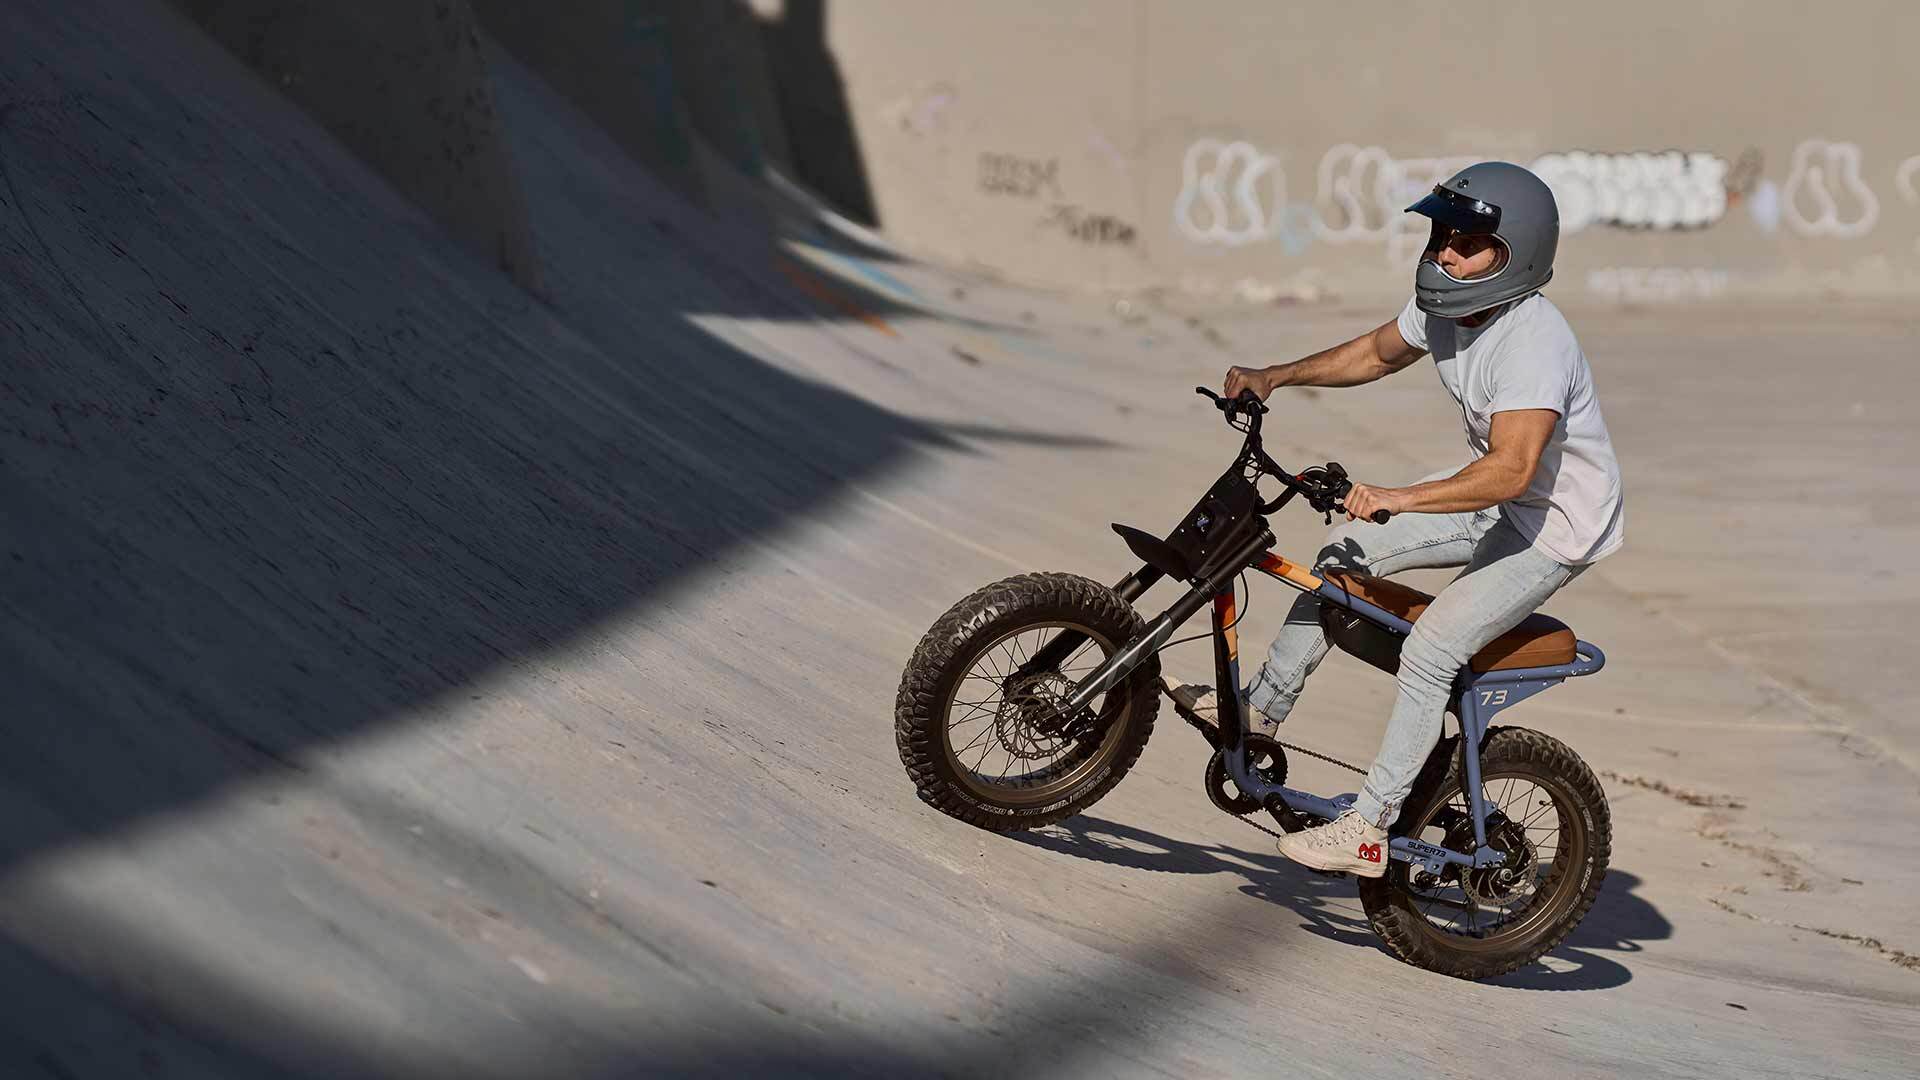 Rider on a Super73-Z Adventure ebike riding in a concrete alleyway